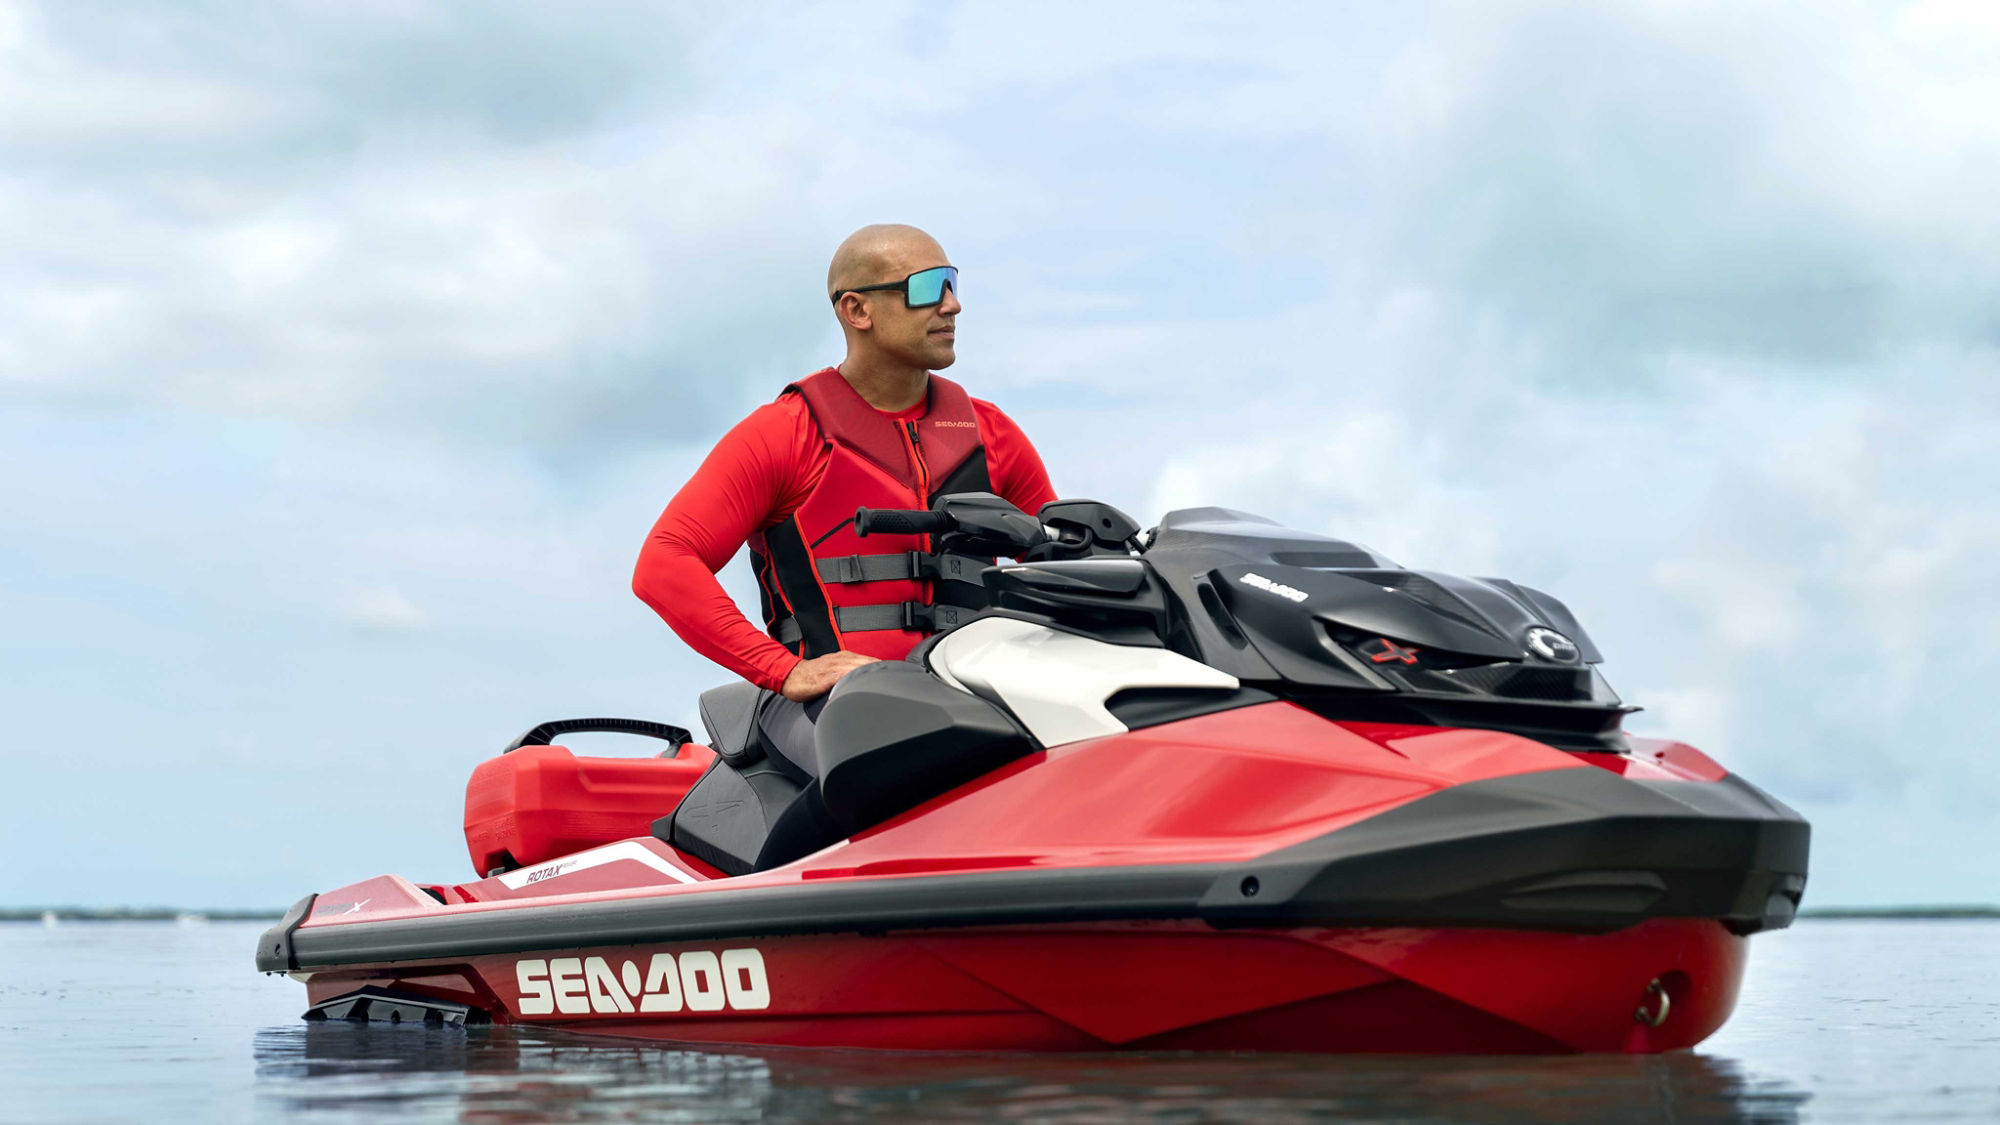 Men sitting on his Sea-Doo RXP-X equipped with performance accessories